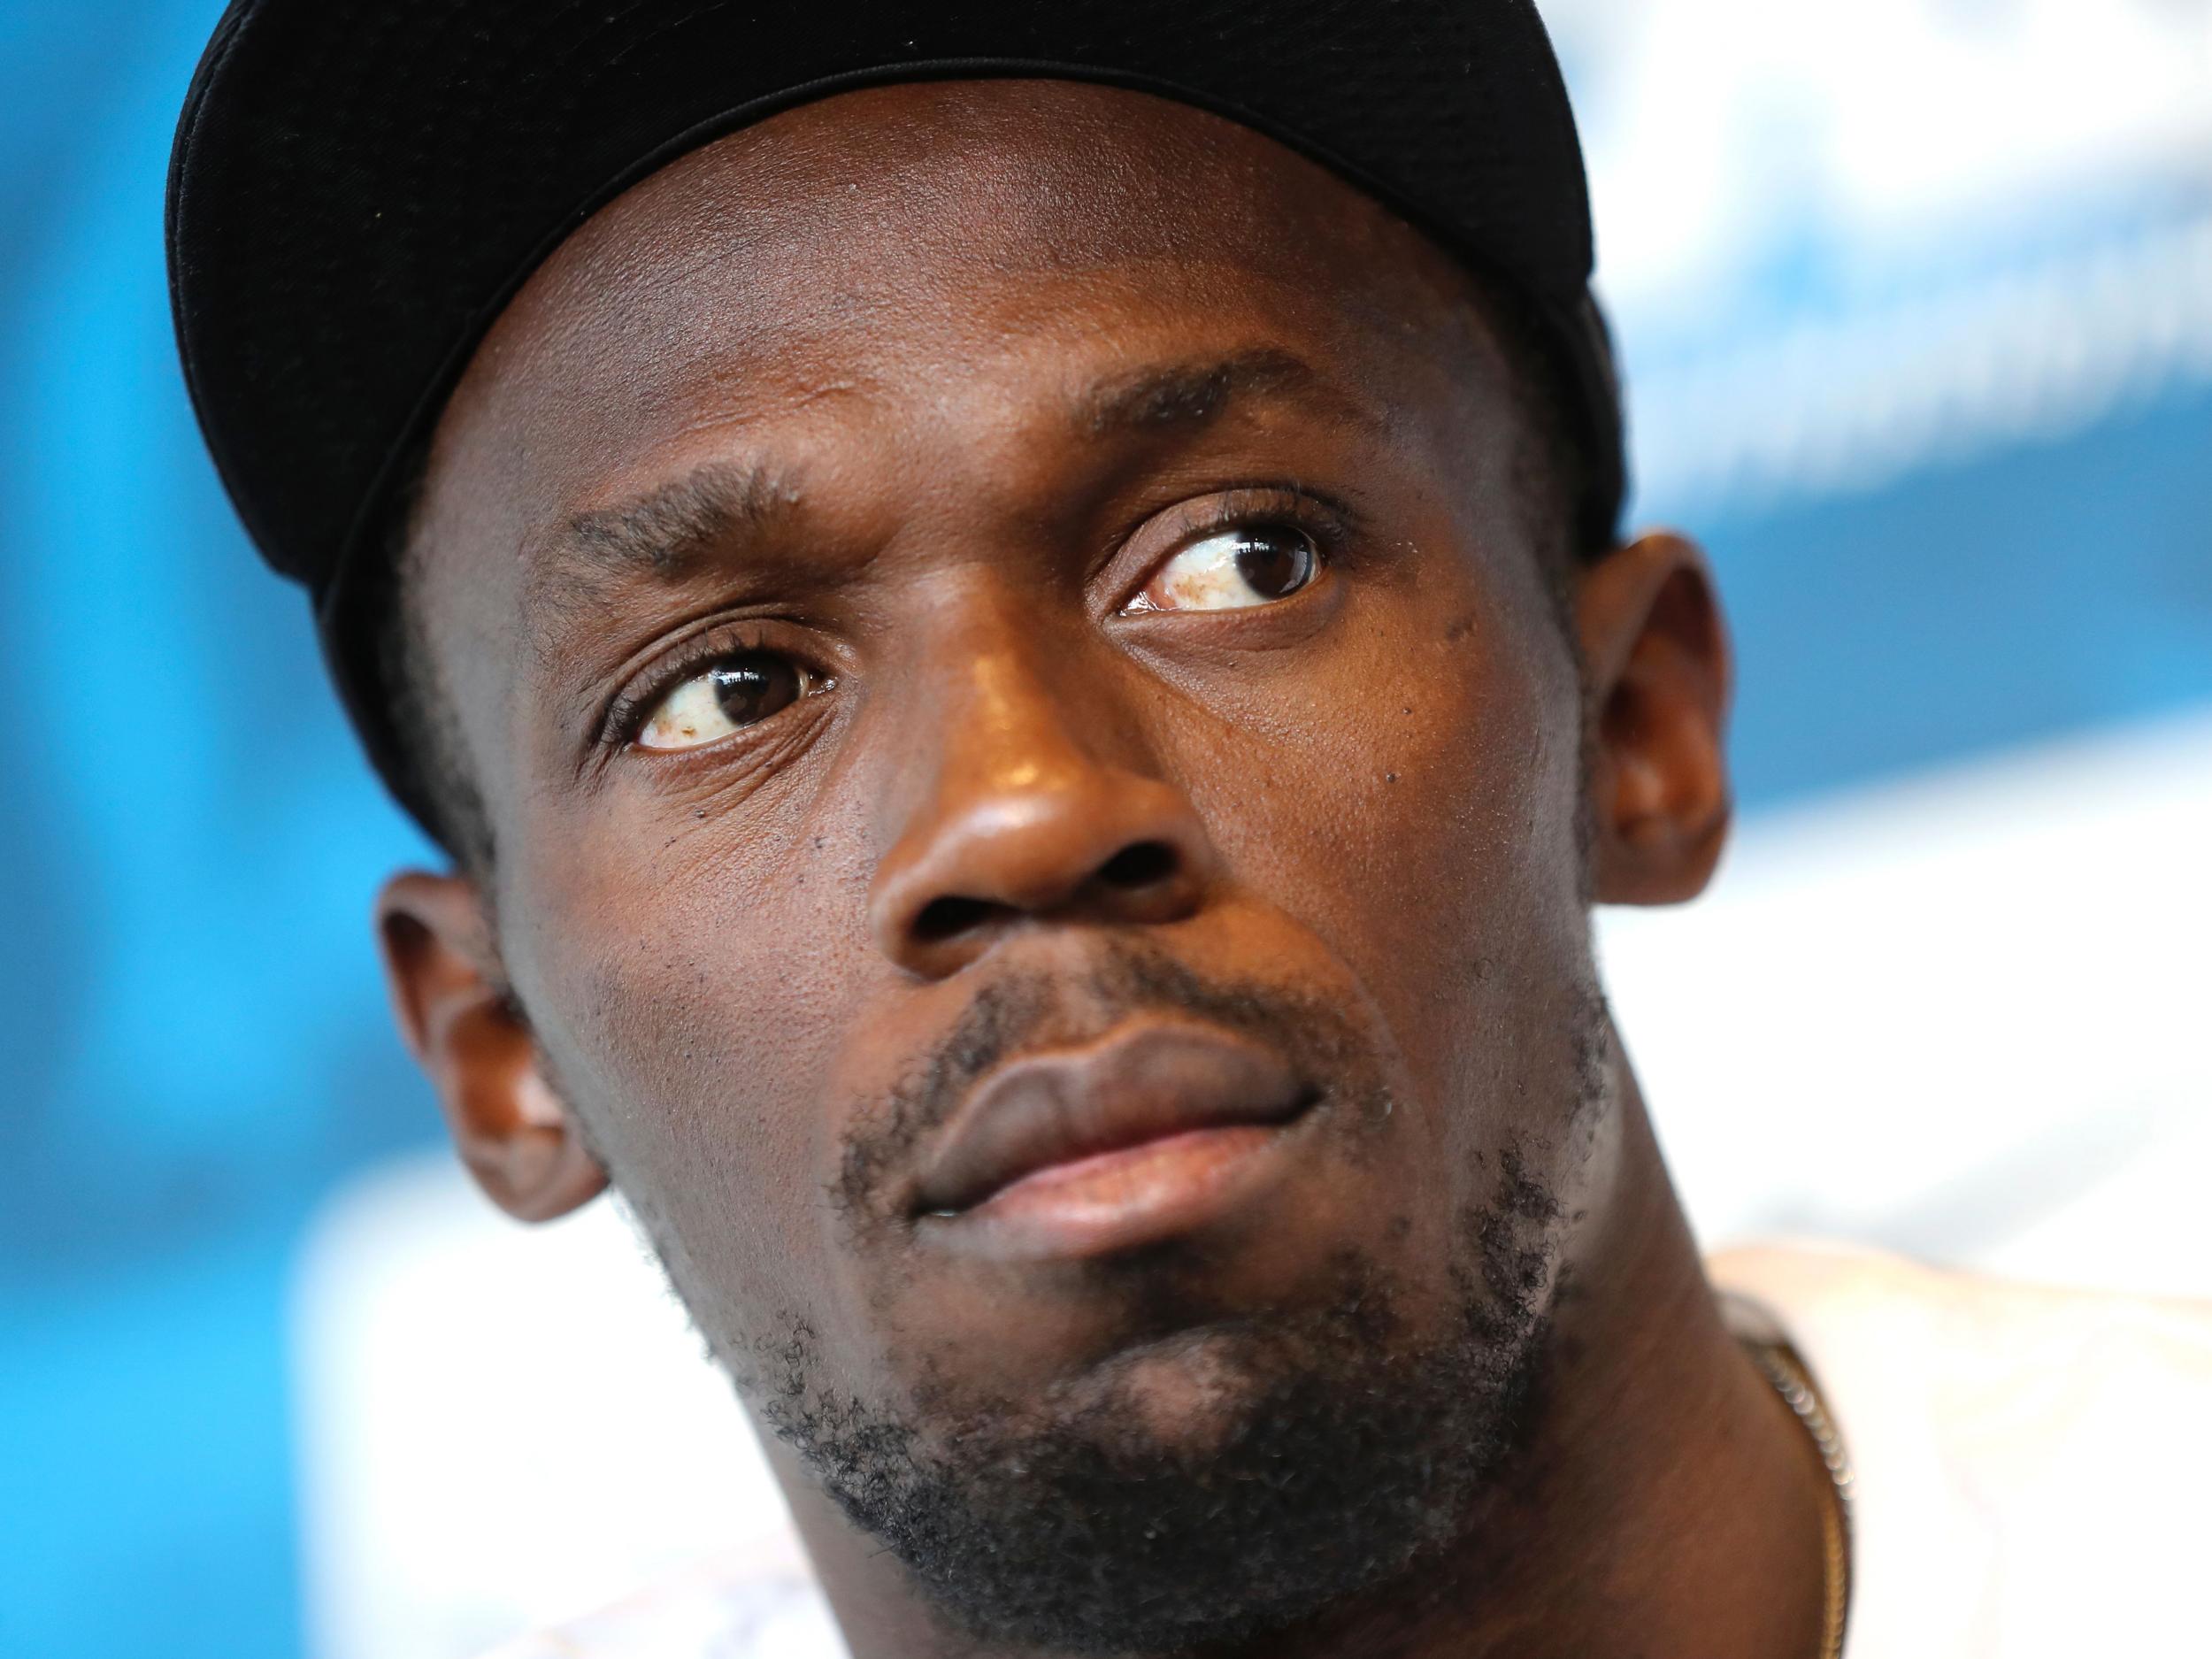 Bolt will retire after the upcoming World Athletics Championships in London